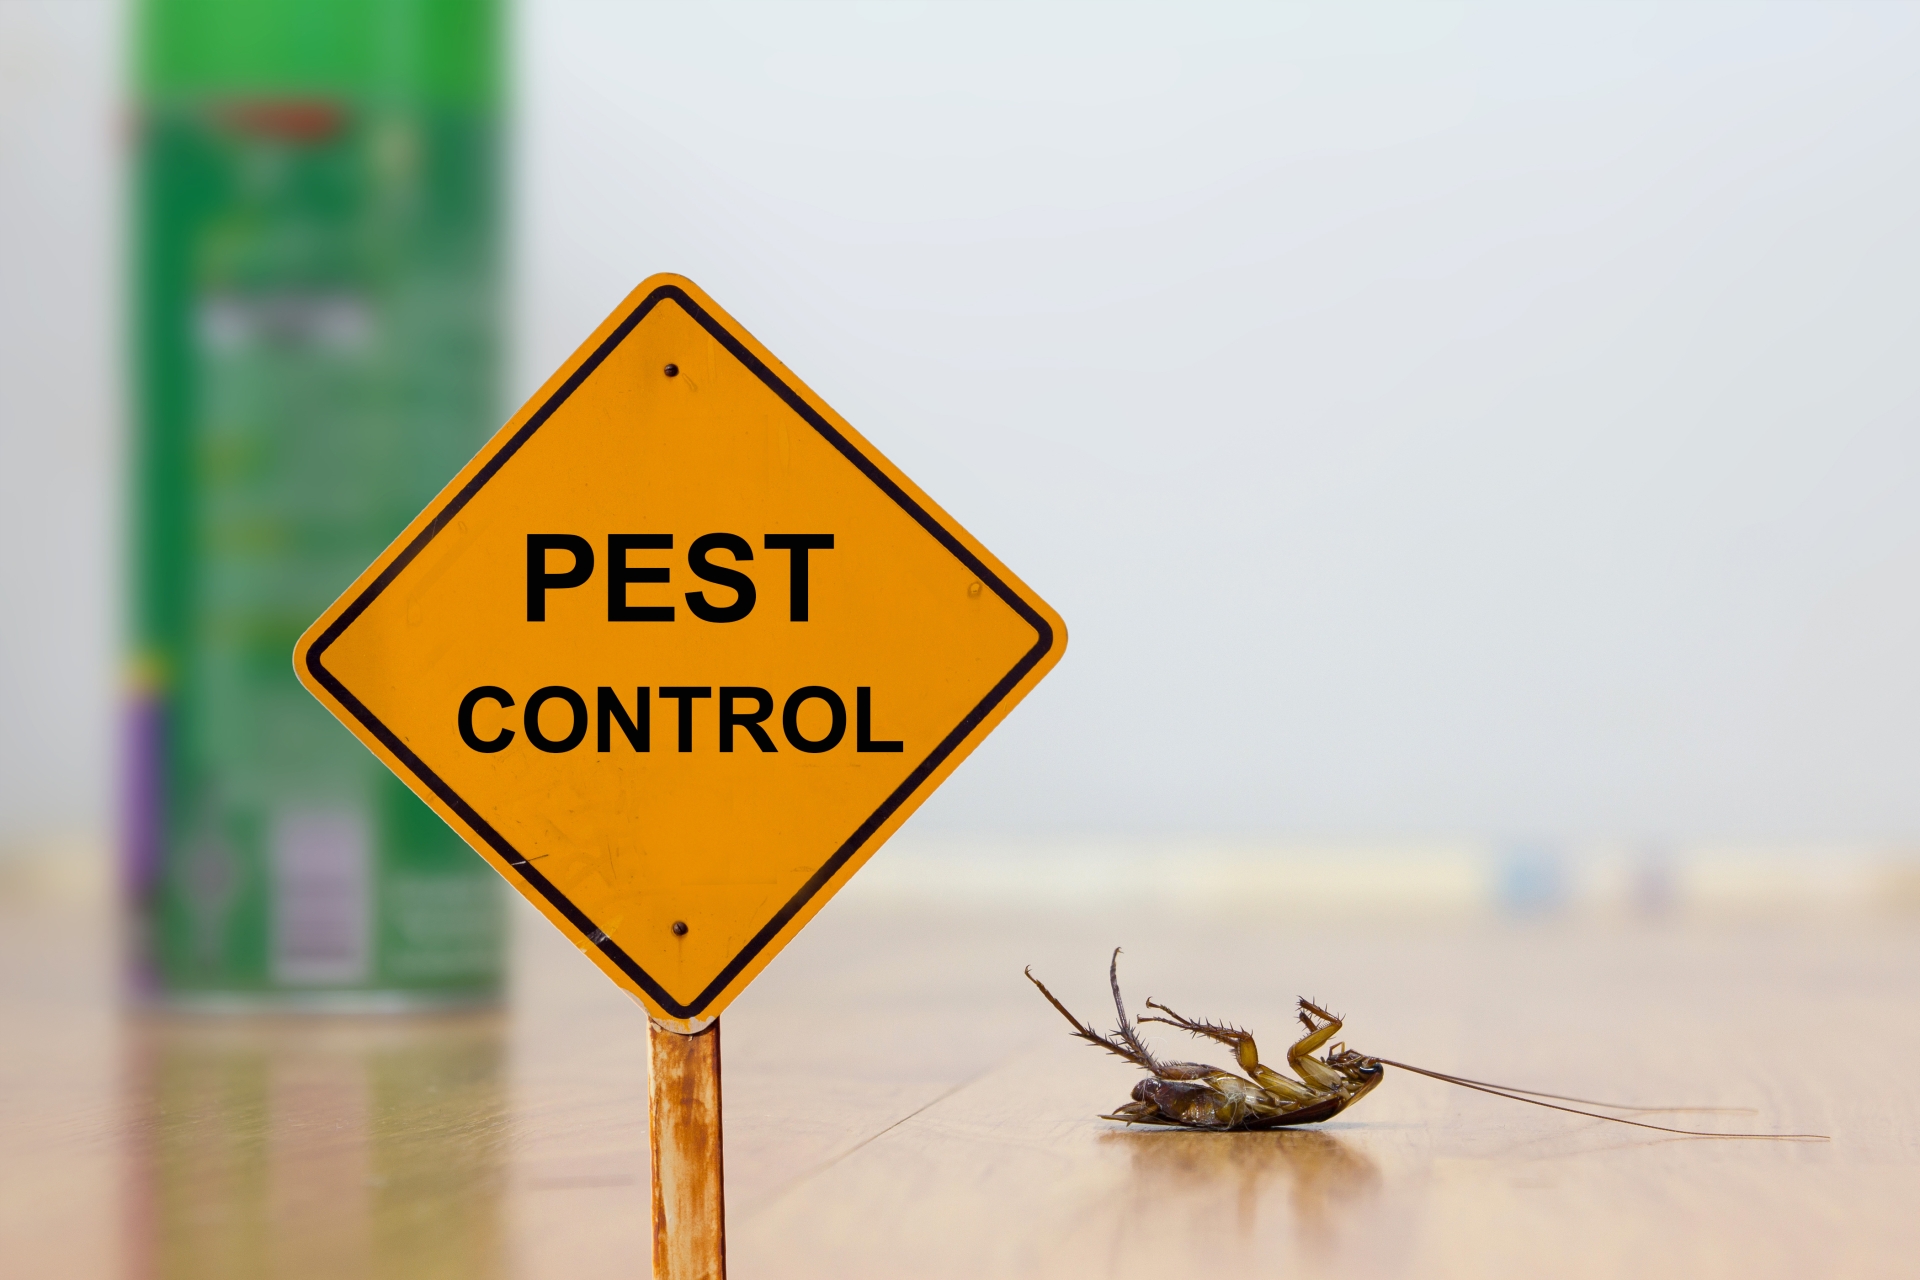 24 Hour Pest Control, Pest Control in Merton, SW19. Call Now 020 8166 9746